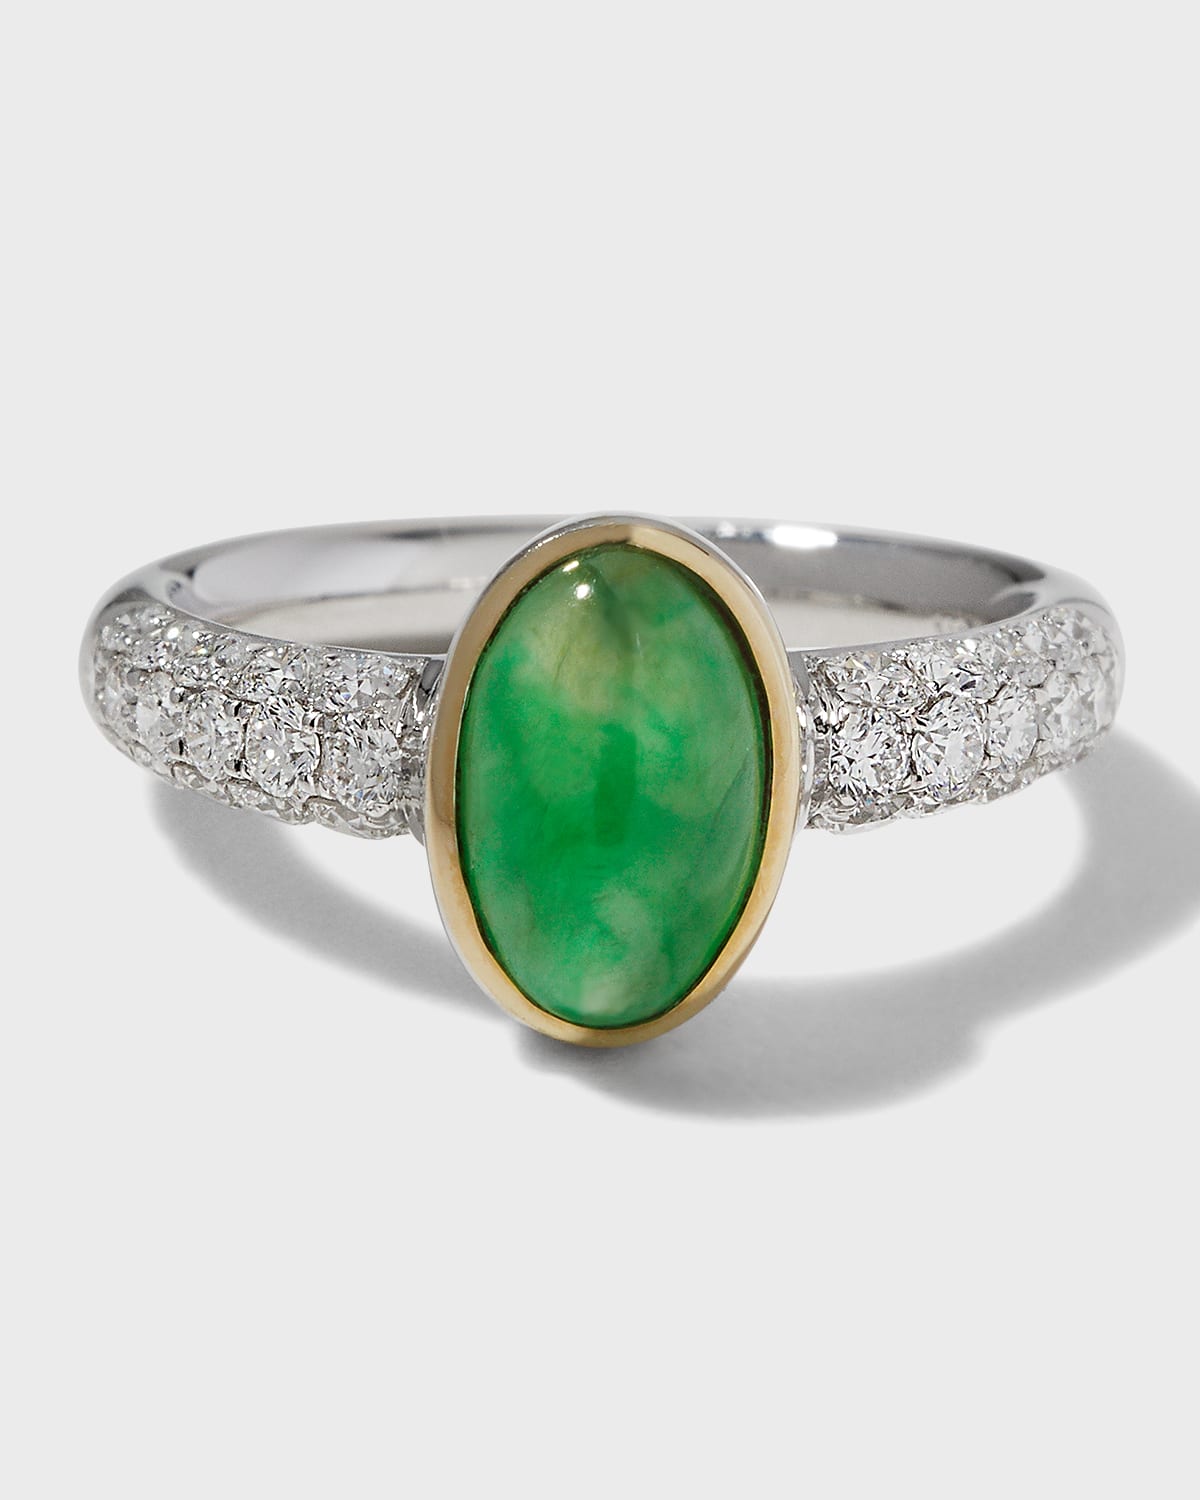 David C.A. Lin Translucent Green Jadeite Small Oval Ring, Size 6